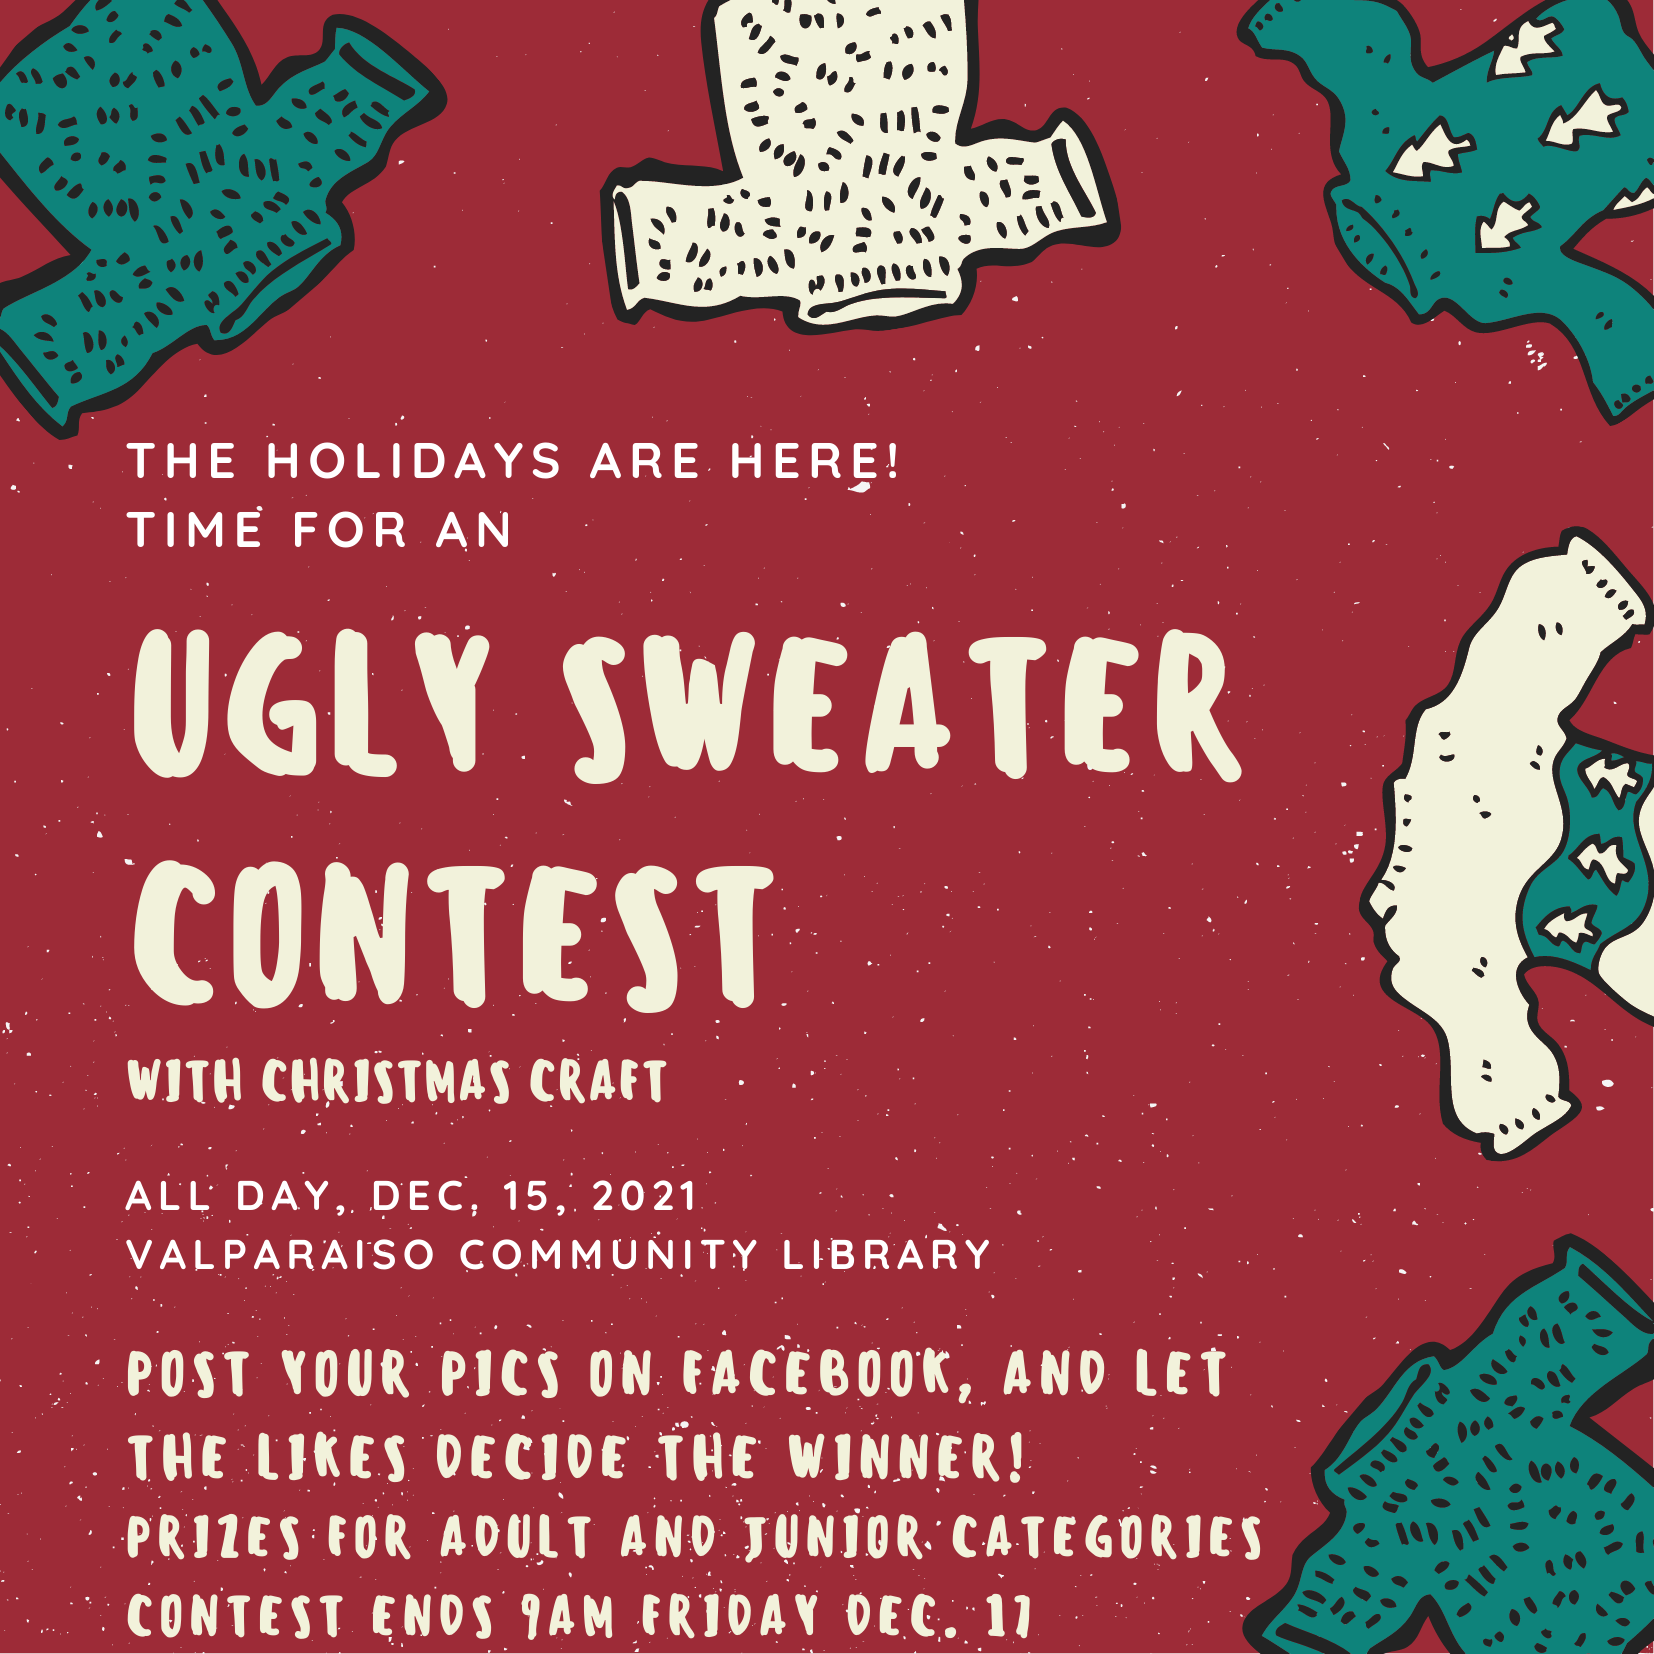 Contest and Craft